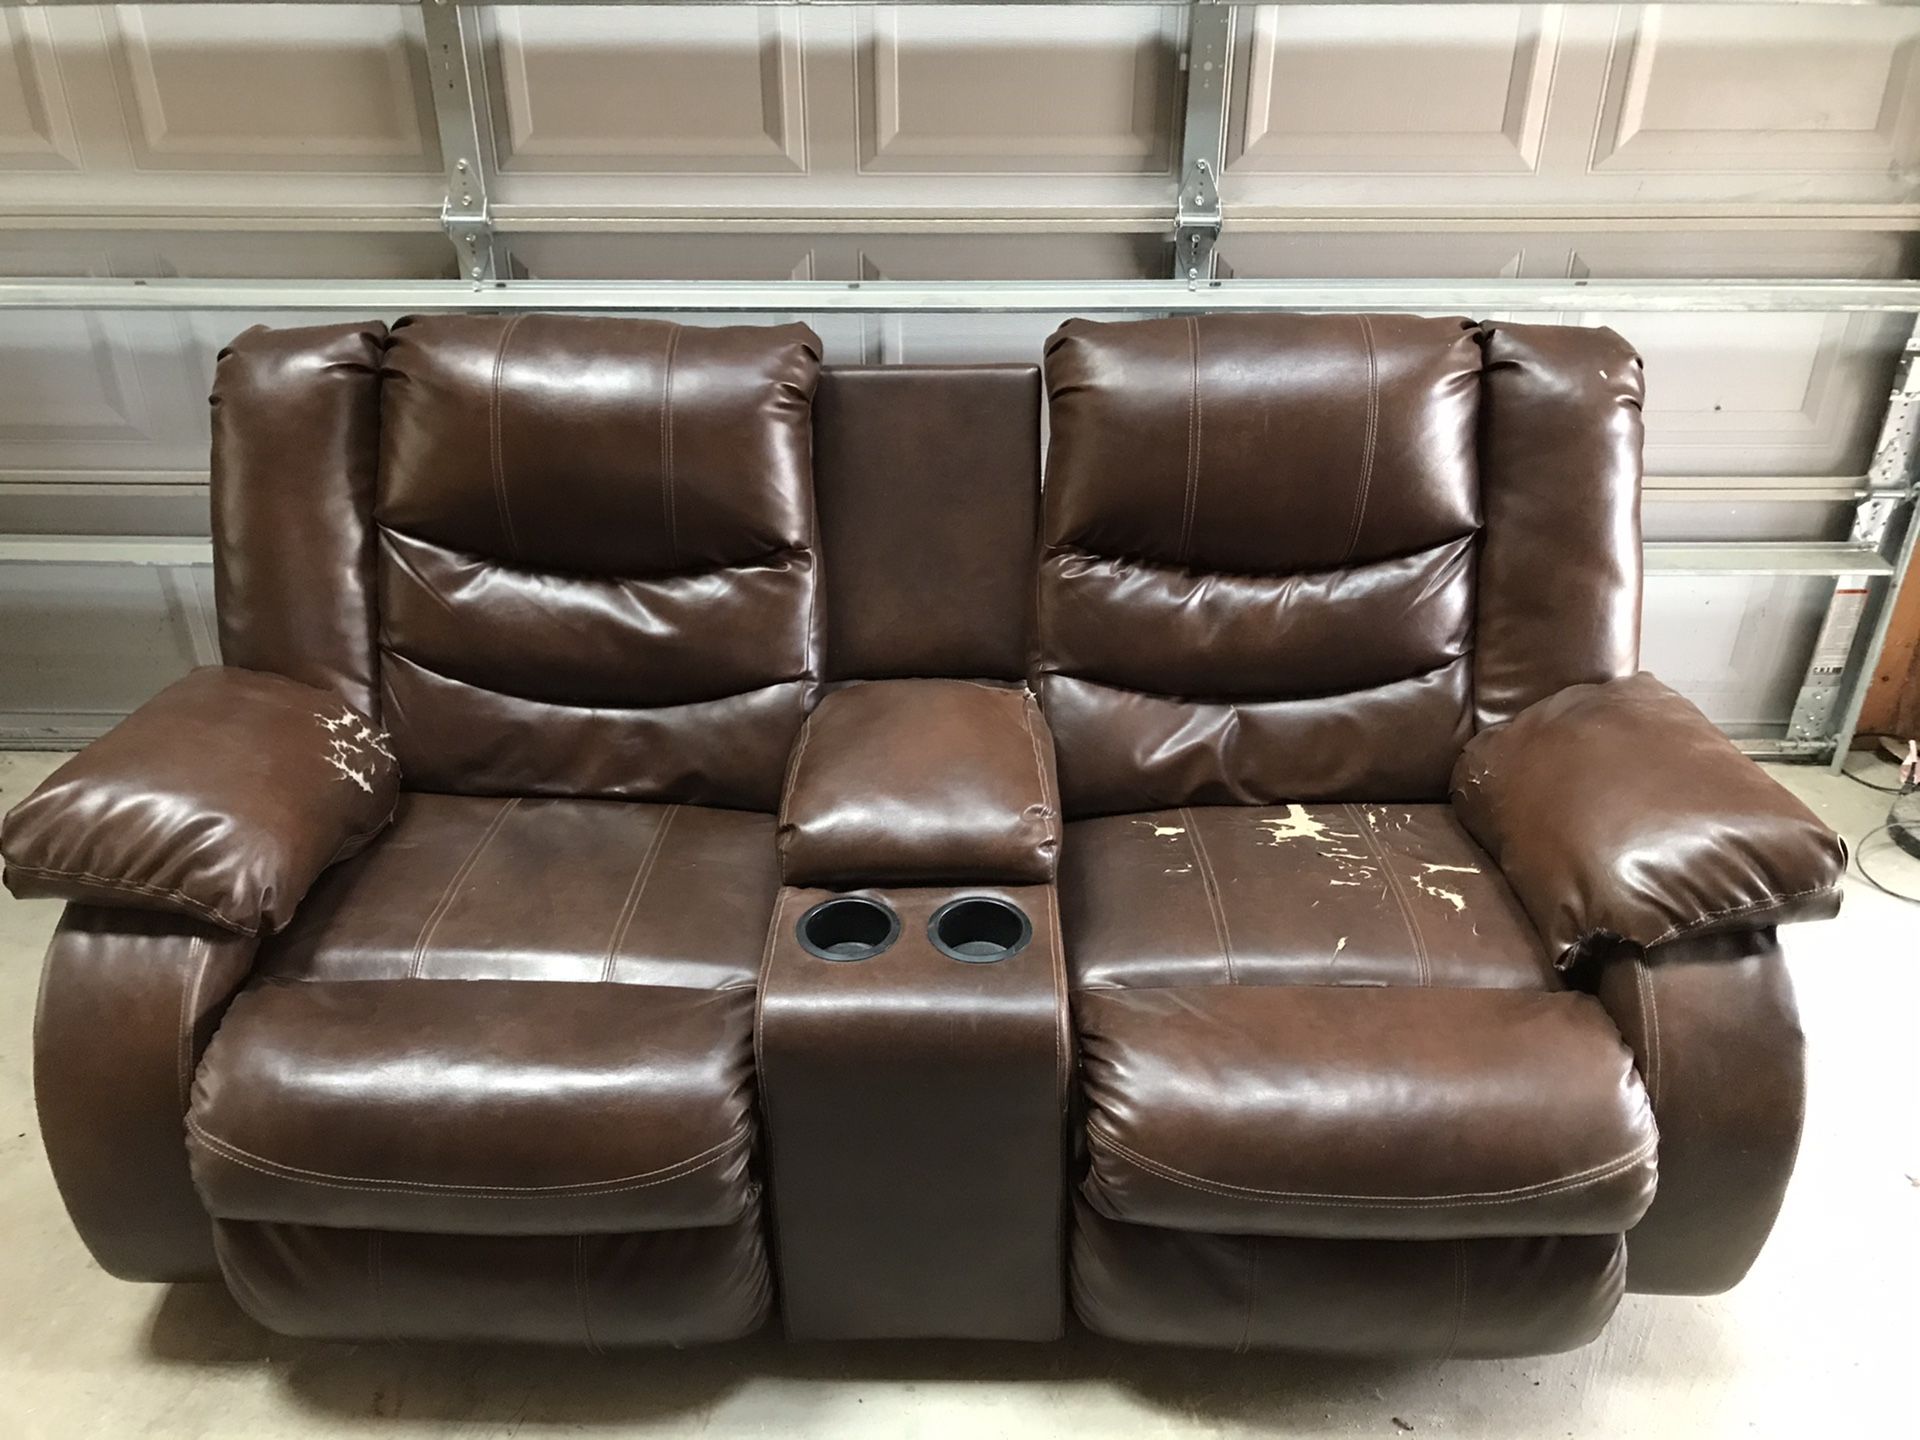 Dual Recliner Couch with center console.